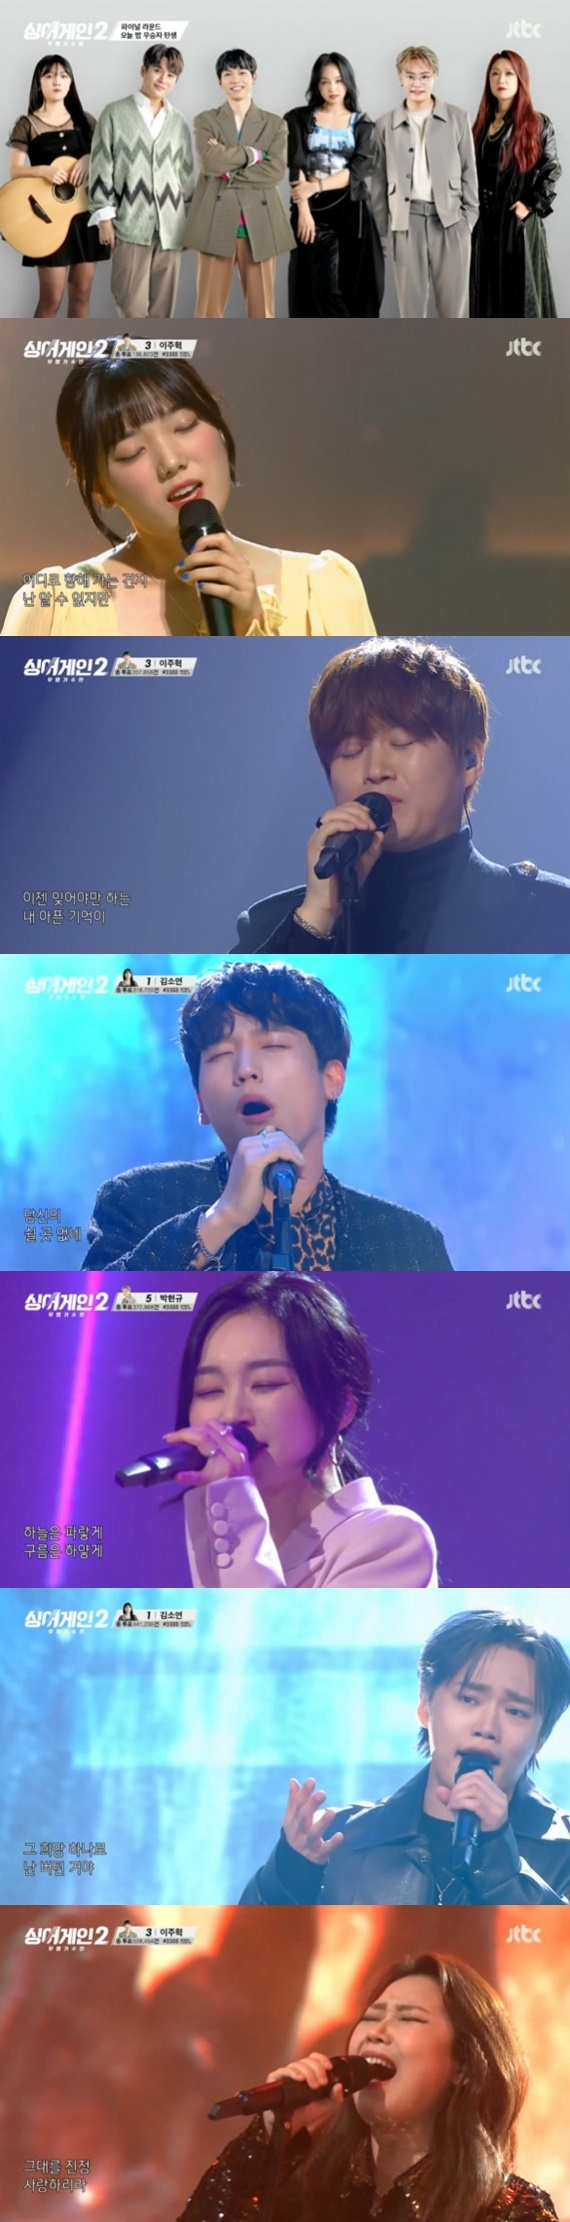 Seoul = = Singer Kim Ki-tai won the Sing Again 2 title.In the final session of JTBC entertainment program Sing Again 2 broadcasted on the afternoon of the 28th, a long-awaited final was held to cover the winner.After four months of intense journeys, Kim So-yeon, Kim Ki-tai, Lee Ju-hyeok, Shin Yumi, Park Hyun Kyu and Yoon Sung came in the top six.The final winner is covered by a percentage of 10% online pre-voting, 40% judging panel score, and 50% real-time character voting score.Kim So-yeon, who survived like a Phoenix with a continued additional pass, opened the final stage.Kim So-yeon said, I feel like I have exceeded the limit while doing Sing Again 2 and I think I have grown up.Kim So-yeon was determined to decorate the last gate of Sing Again 2 beautifully, selecting People are too changed in spring, summer, autumn and winter, a song that I heard a lot when I dreamed of a singer.Kim So-yeon scored 751 judges points.Kim Ki-tai, a heavy and dark cloudy owner, was determined to find the Bongan party, which was his only supporter, ahead of the final stage.Kim Ki-tai is saddened by the Confessions of his rejection of his father who tried to see his stage to show a better stage.Kim Ki-tai said, I will work hard until the end, so please watch and listen to me. He expressed his heart toward his father and enthusiastically sang the after love of the whole human rights.Kim Ki-tai earned a judges score of 749.Lee Ju-hyeok, who had become a famous figure in his hometown Geoje Island, visited his hometown Geoje Island in a year and attracted attention with the reunion of tears with his family.My parents, who opposed Lee Joo-hyuks dream, did not hesitate to support Lee Joo-hyuk, saying, I am very proud and proud.Lee Joo-hyuk, who broadened the music spectrum through Sing Again 2 and found himself new, worried about his identity, won 746 points for judges and judges in the Thorn Tree of poets and chiefs.Shin Yumi met with choreographers Bae Yoon-jung, Choi Young-joon, and Lee Jin-hyuk of the programs student uptension, who taught idol idol idol producers together in the Produce 101 series.When Shin Yumi confided in the burden of Sing Again 2 stage, Bae Yoon-jung advised, It is not easy to enjoy it, but you can enjoy it as you do to your children. It is important that you do not regret it and shake it off.Shin Yumi selected Lee Sun-hees Beautiful Gangsan and reinterpreted it in a unique way and earned 738 points for the judges.Park Hyun Kyu was supported by his best friend Mama Musola, who had been in a relationship since Idol Producer for more than 10 years.Hwasa also cheers Park Hyun Kyu on video callFor Park Hyun Kyu, who is not confident because he is the first to do it alone, Mamamu also encourages confidence with sincere support and support.Park Hyun Kyu was called Kabul in his full confidence, but after the continued failure and late enlistment, he became calm.Park Hyun Kyu selected Kim Bum-soos Ginda and earned a score of 757.Yoon Sung, who came to the last stage, expressed Sing Again 2 as a lottery of life.The band Africa together said, I was recognized on this floor, but I did not know because I did not have a chance.Yoon Sung recalled the first time he fell into the charm of rock, and he picked up Sinawis Candle in front of you and earned an explosive treble and earned a score of 749.While the score was counted, Lee Seung-yoon, Jung Hong-il and Lee Moo-jin of Singing Again Season 1 added a joint stage with the top 6 and added heat.The final result, which combined all the scores, was honored by Kim Ki-tai to win the final.Kim So-yeon ranked second, Yoon Sung ranked fourth, Park Hyun Kyu ranked fifth, Lee Ju-hyeok ranked fifth, and Shin Yumi ranked sixth.Kim Ki-tai said, I am most grateful to the fans who listened to and liked the song.I want to tell you to never give up and to cheer up, I know this moment is not eternal, I will work hard to the end, I want you to do all of your strength, I love my wife and son so much and thank you, he said.Meanwhile, JTBC Sing Again 2 is a reboot audition program that helps singers who need one more opportunity to stand in front of the public again.